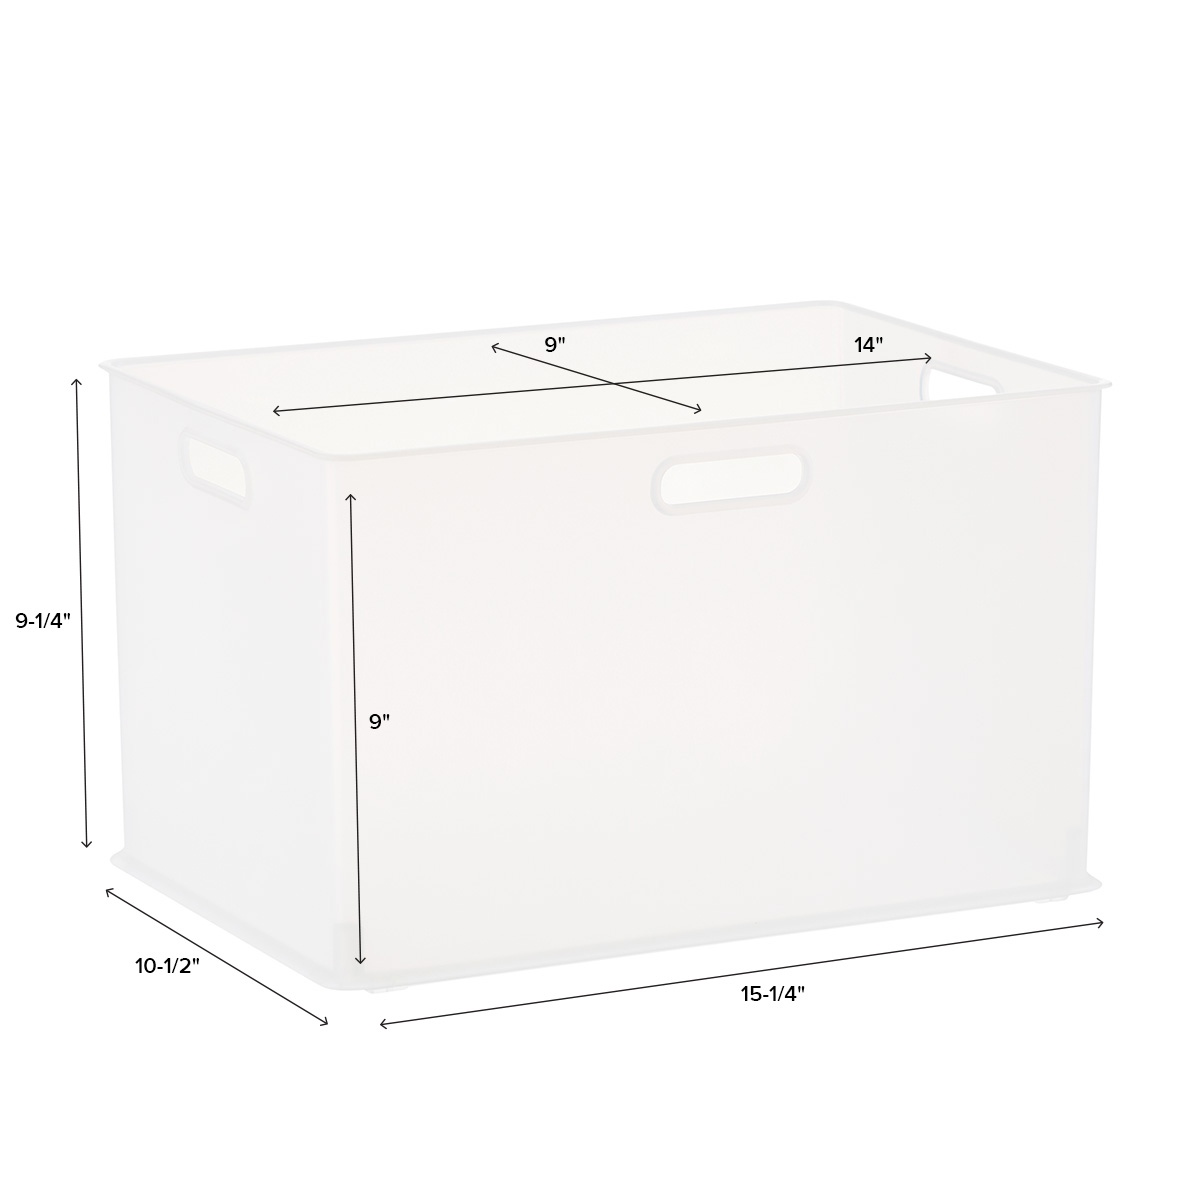 https://www.containerstore.com/catalogimages/445769/10079395-shimo-storage-bin-large-v2-.jpg